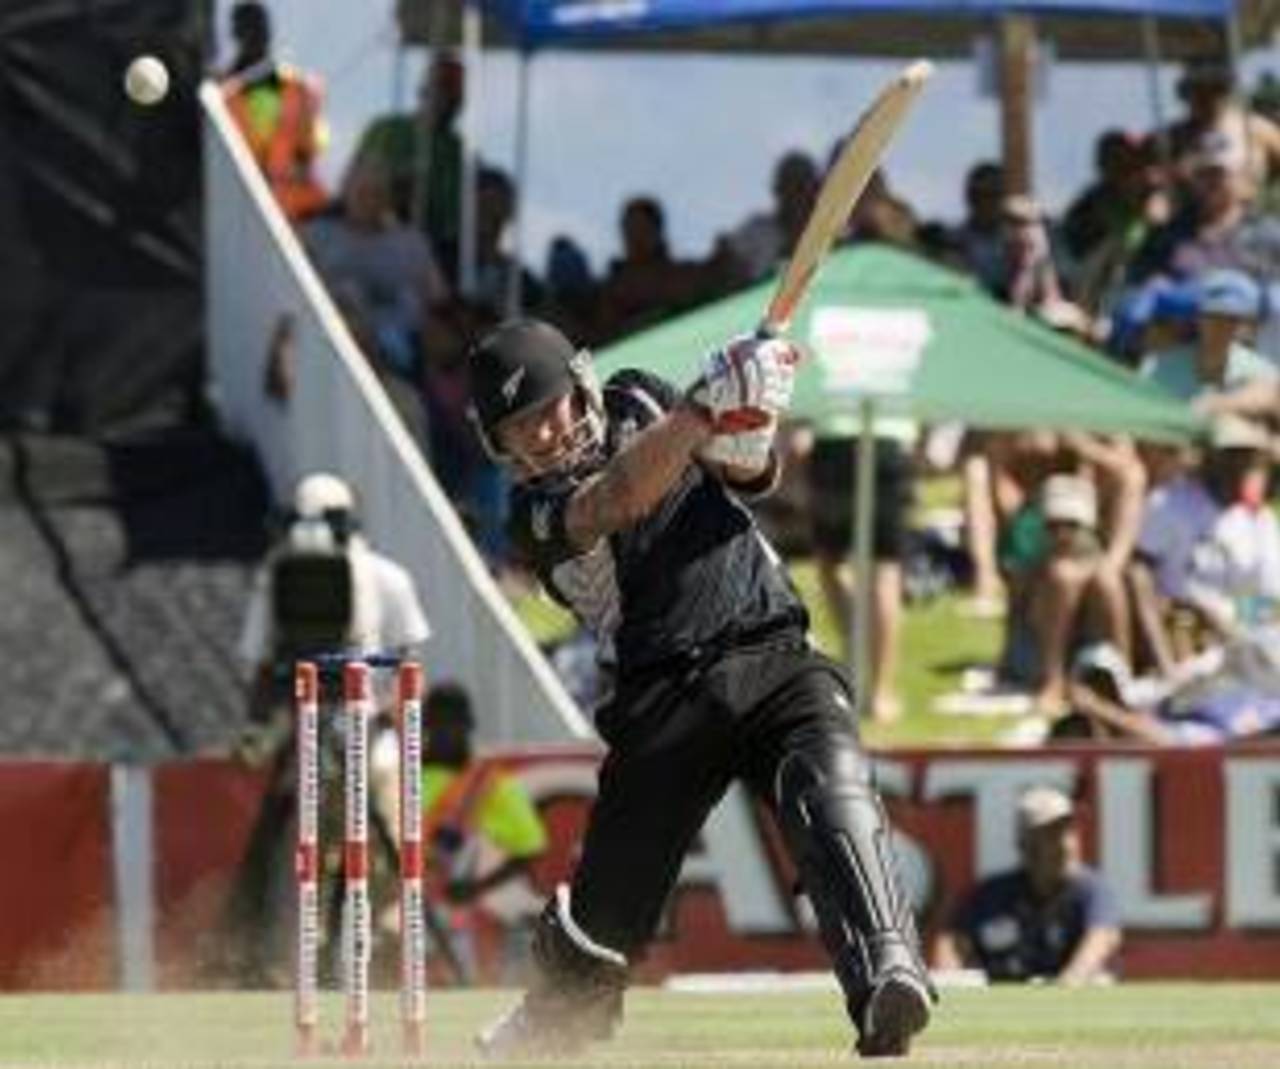 Brendon McCullum was dismissed during the power-cut, when the DRS couldn't be used&nbsp;&nbsp;&bull;&nbsp;&nbsp;AFP